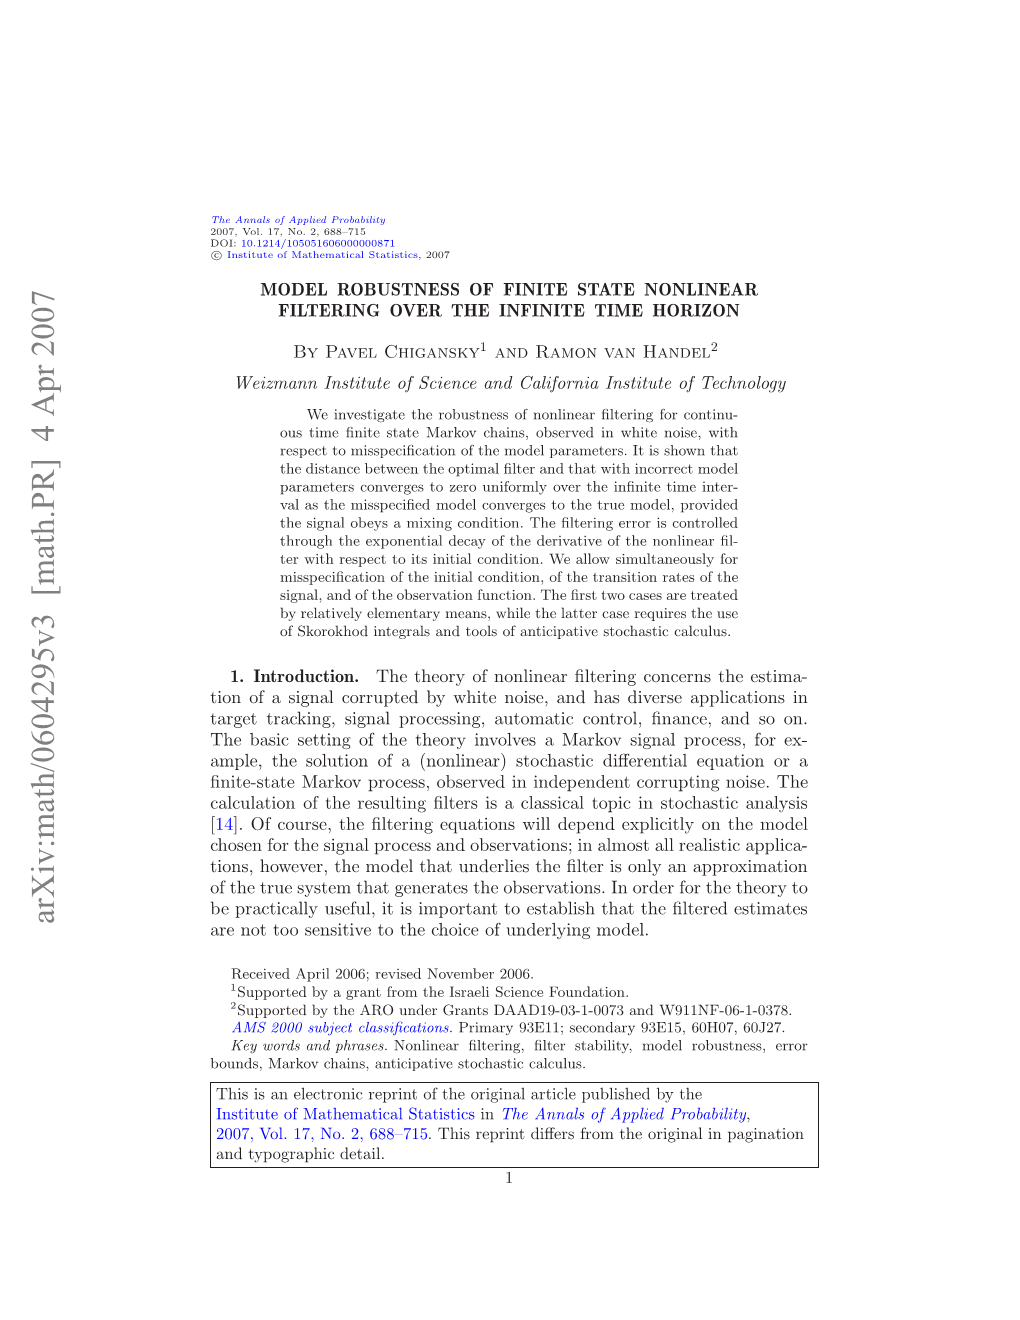 Model Robustness of Finite State Nonlinear Filtering Over the Infinite Time Horizon